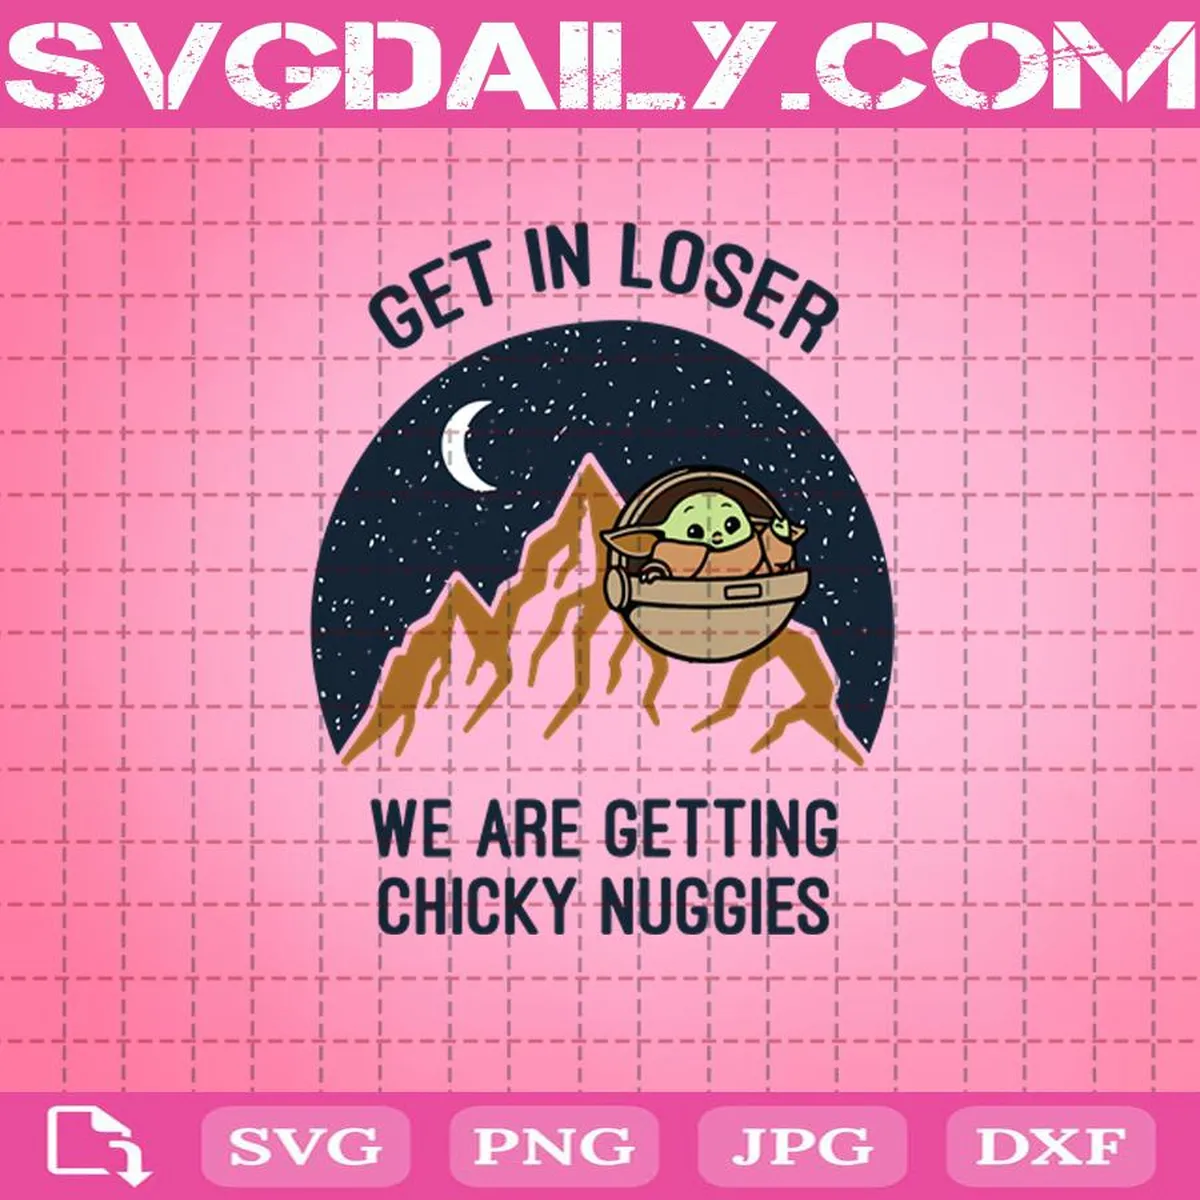 Get In Loser We Are Getting Chicky Nuggies Svg, Baby Yoda Svg, Get In Loser Svg, Baby Yoda Svg Png Dxf Eps AI Instant Download